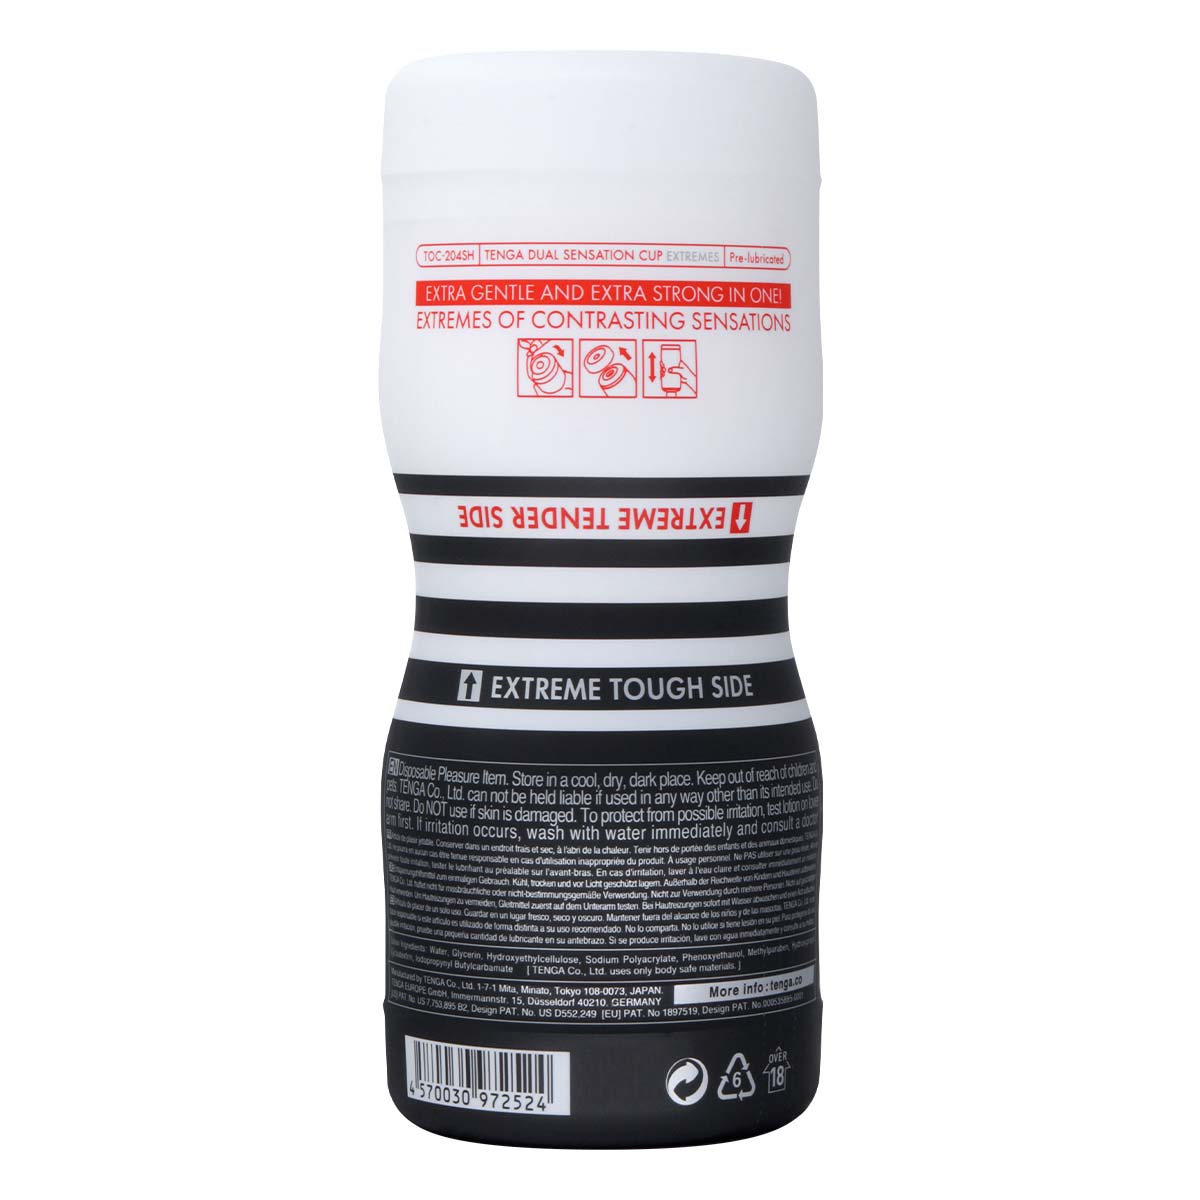 TENGA DUAL FEEL CUP 2nd Generation EXTREMES-p_3